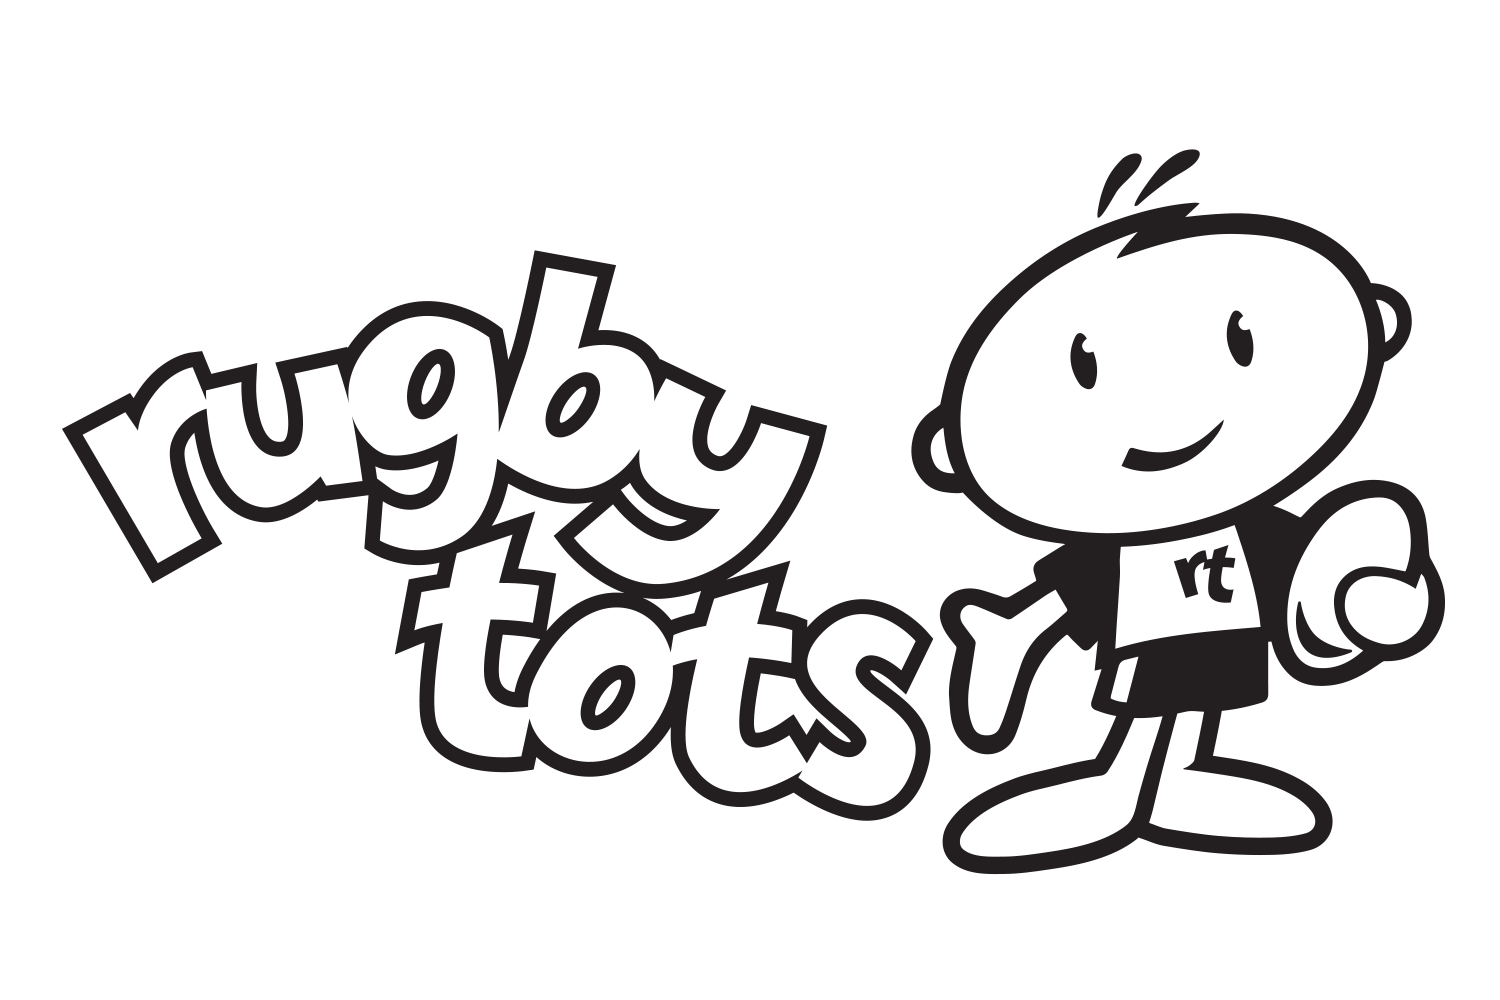 New Rugbytots logo